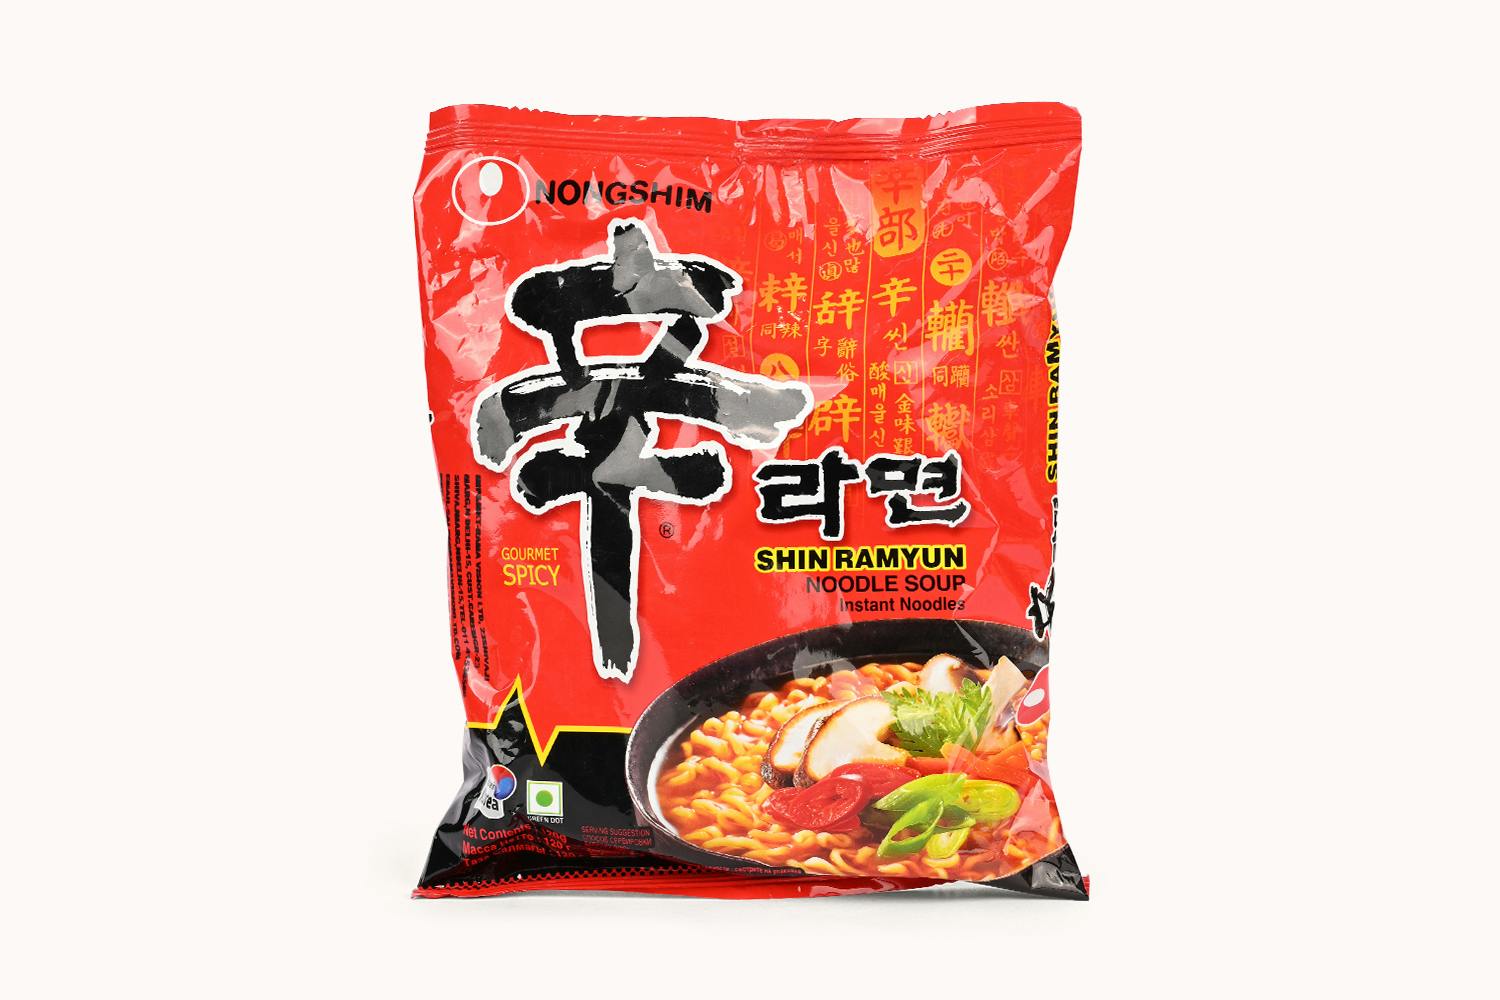 Nongshim Shin Ramyun Noodle Soup (Hot And Spicy)